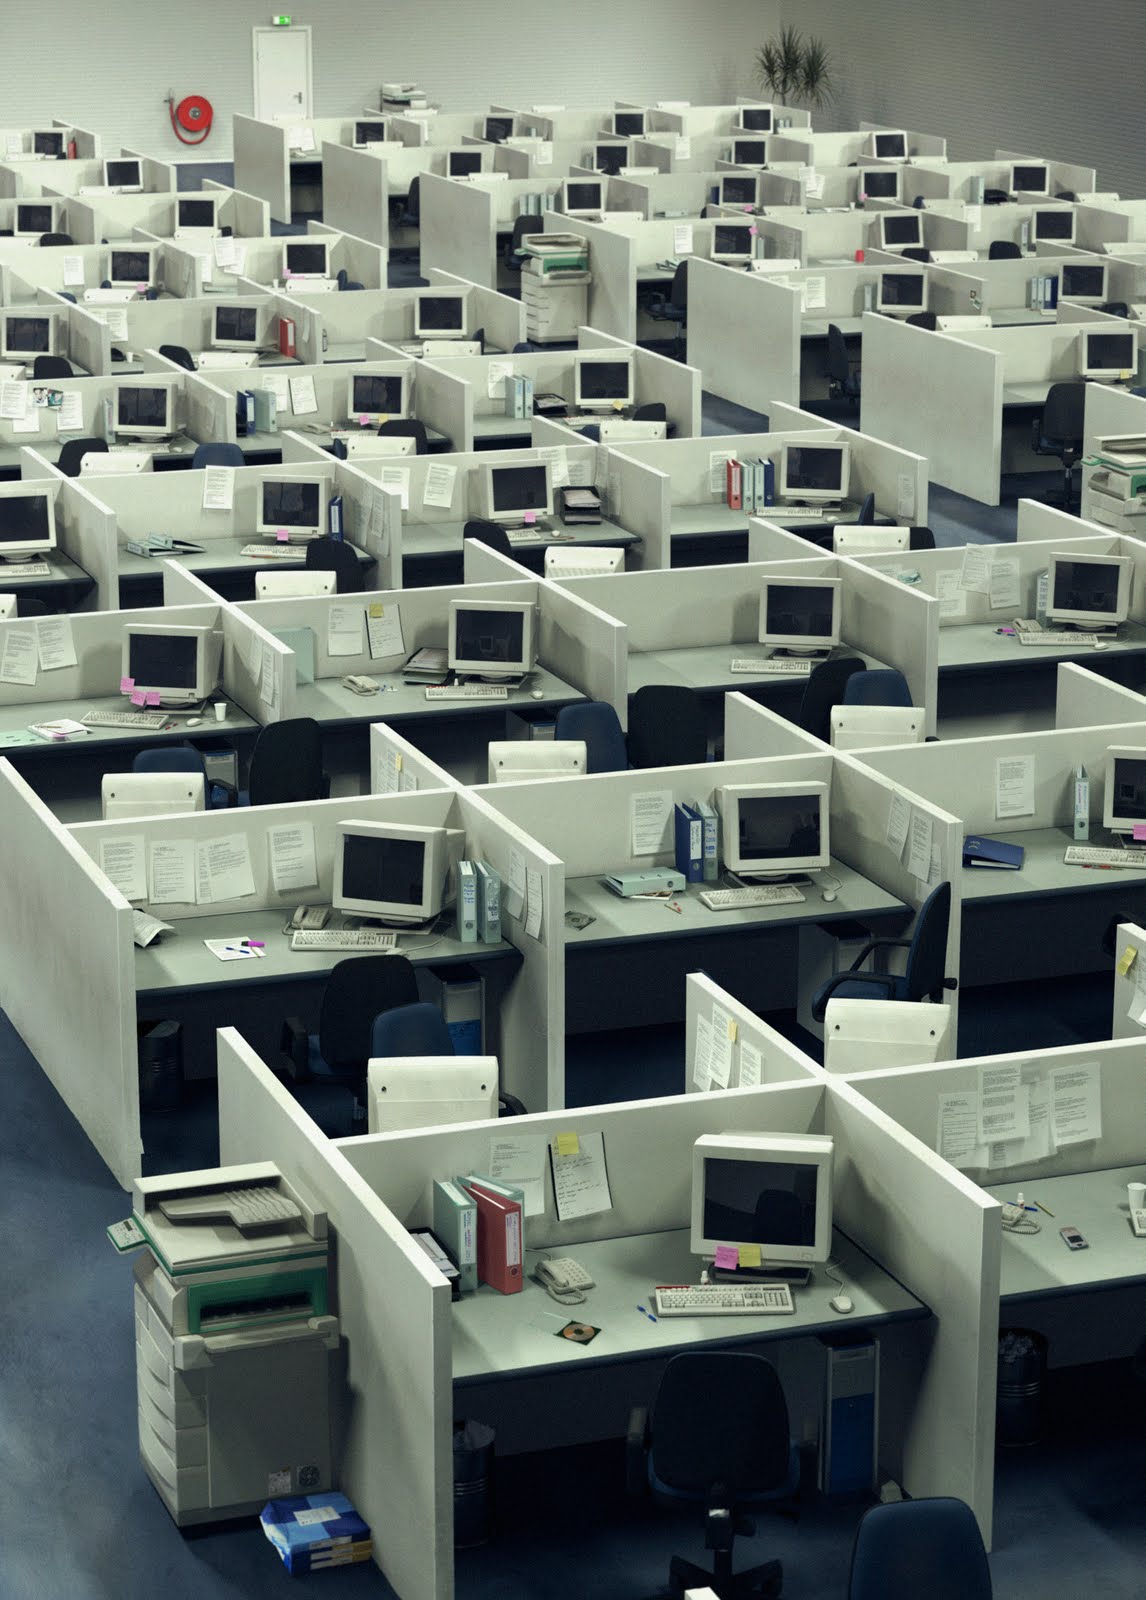 Tons of computers in identical cubicles